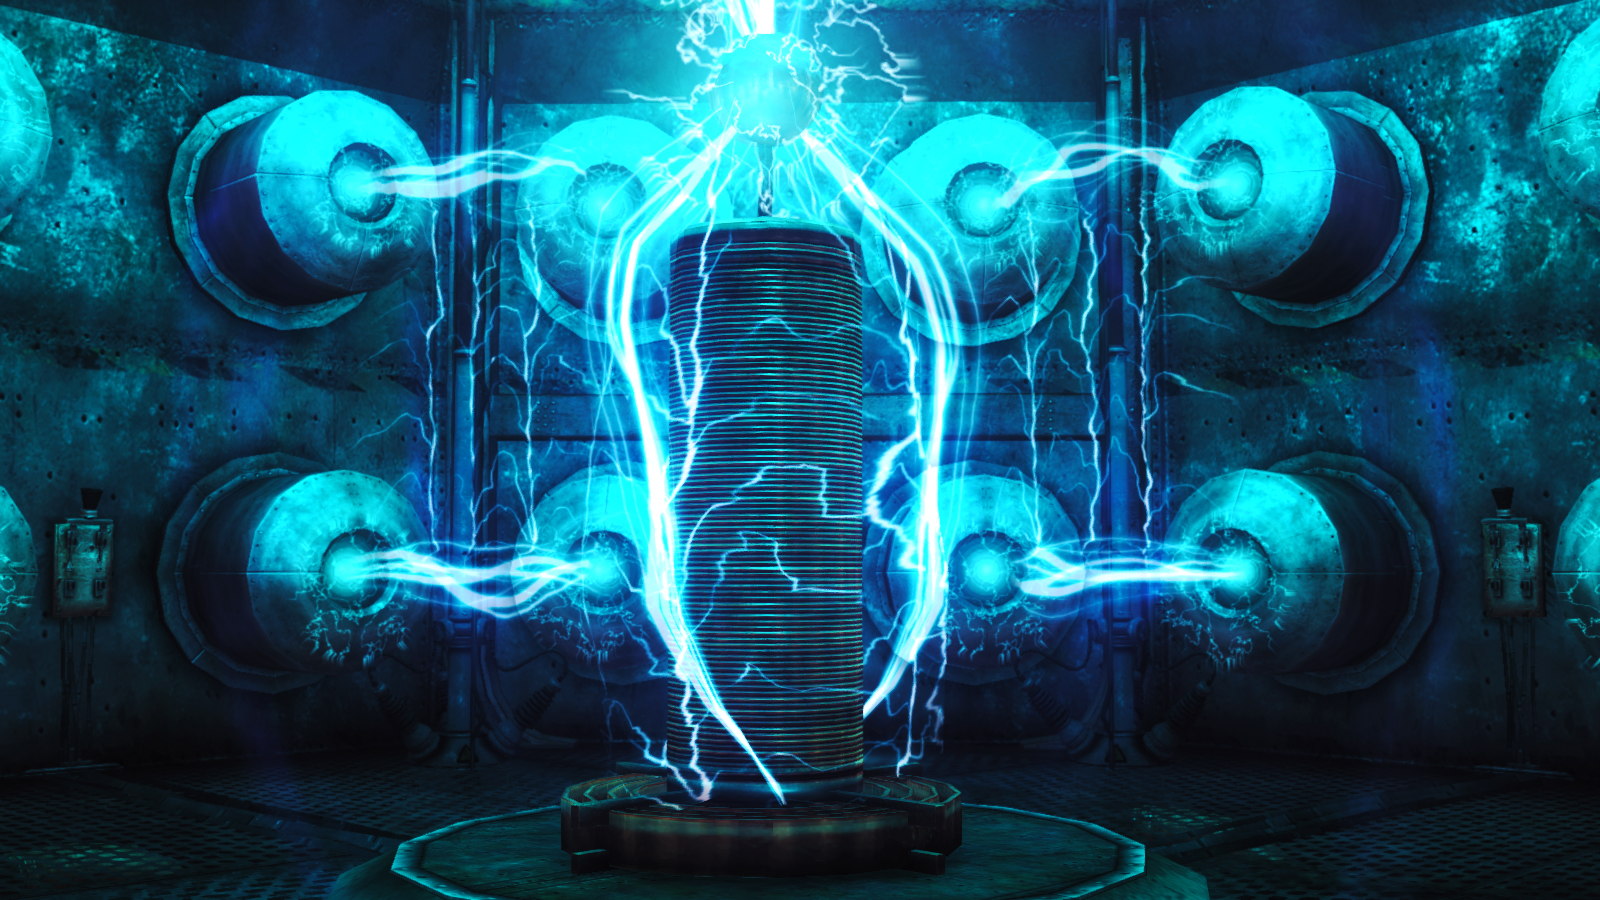 Tesla coil at Fallout3 Nexus and community